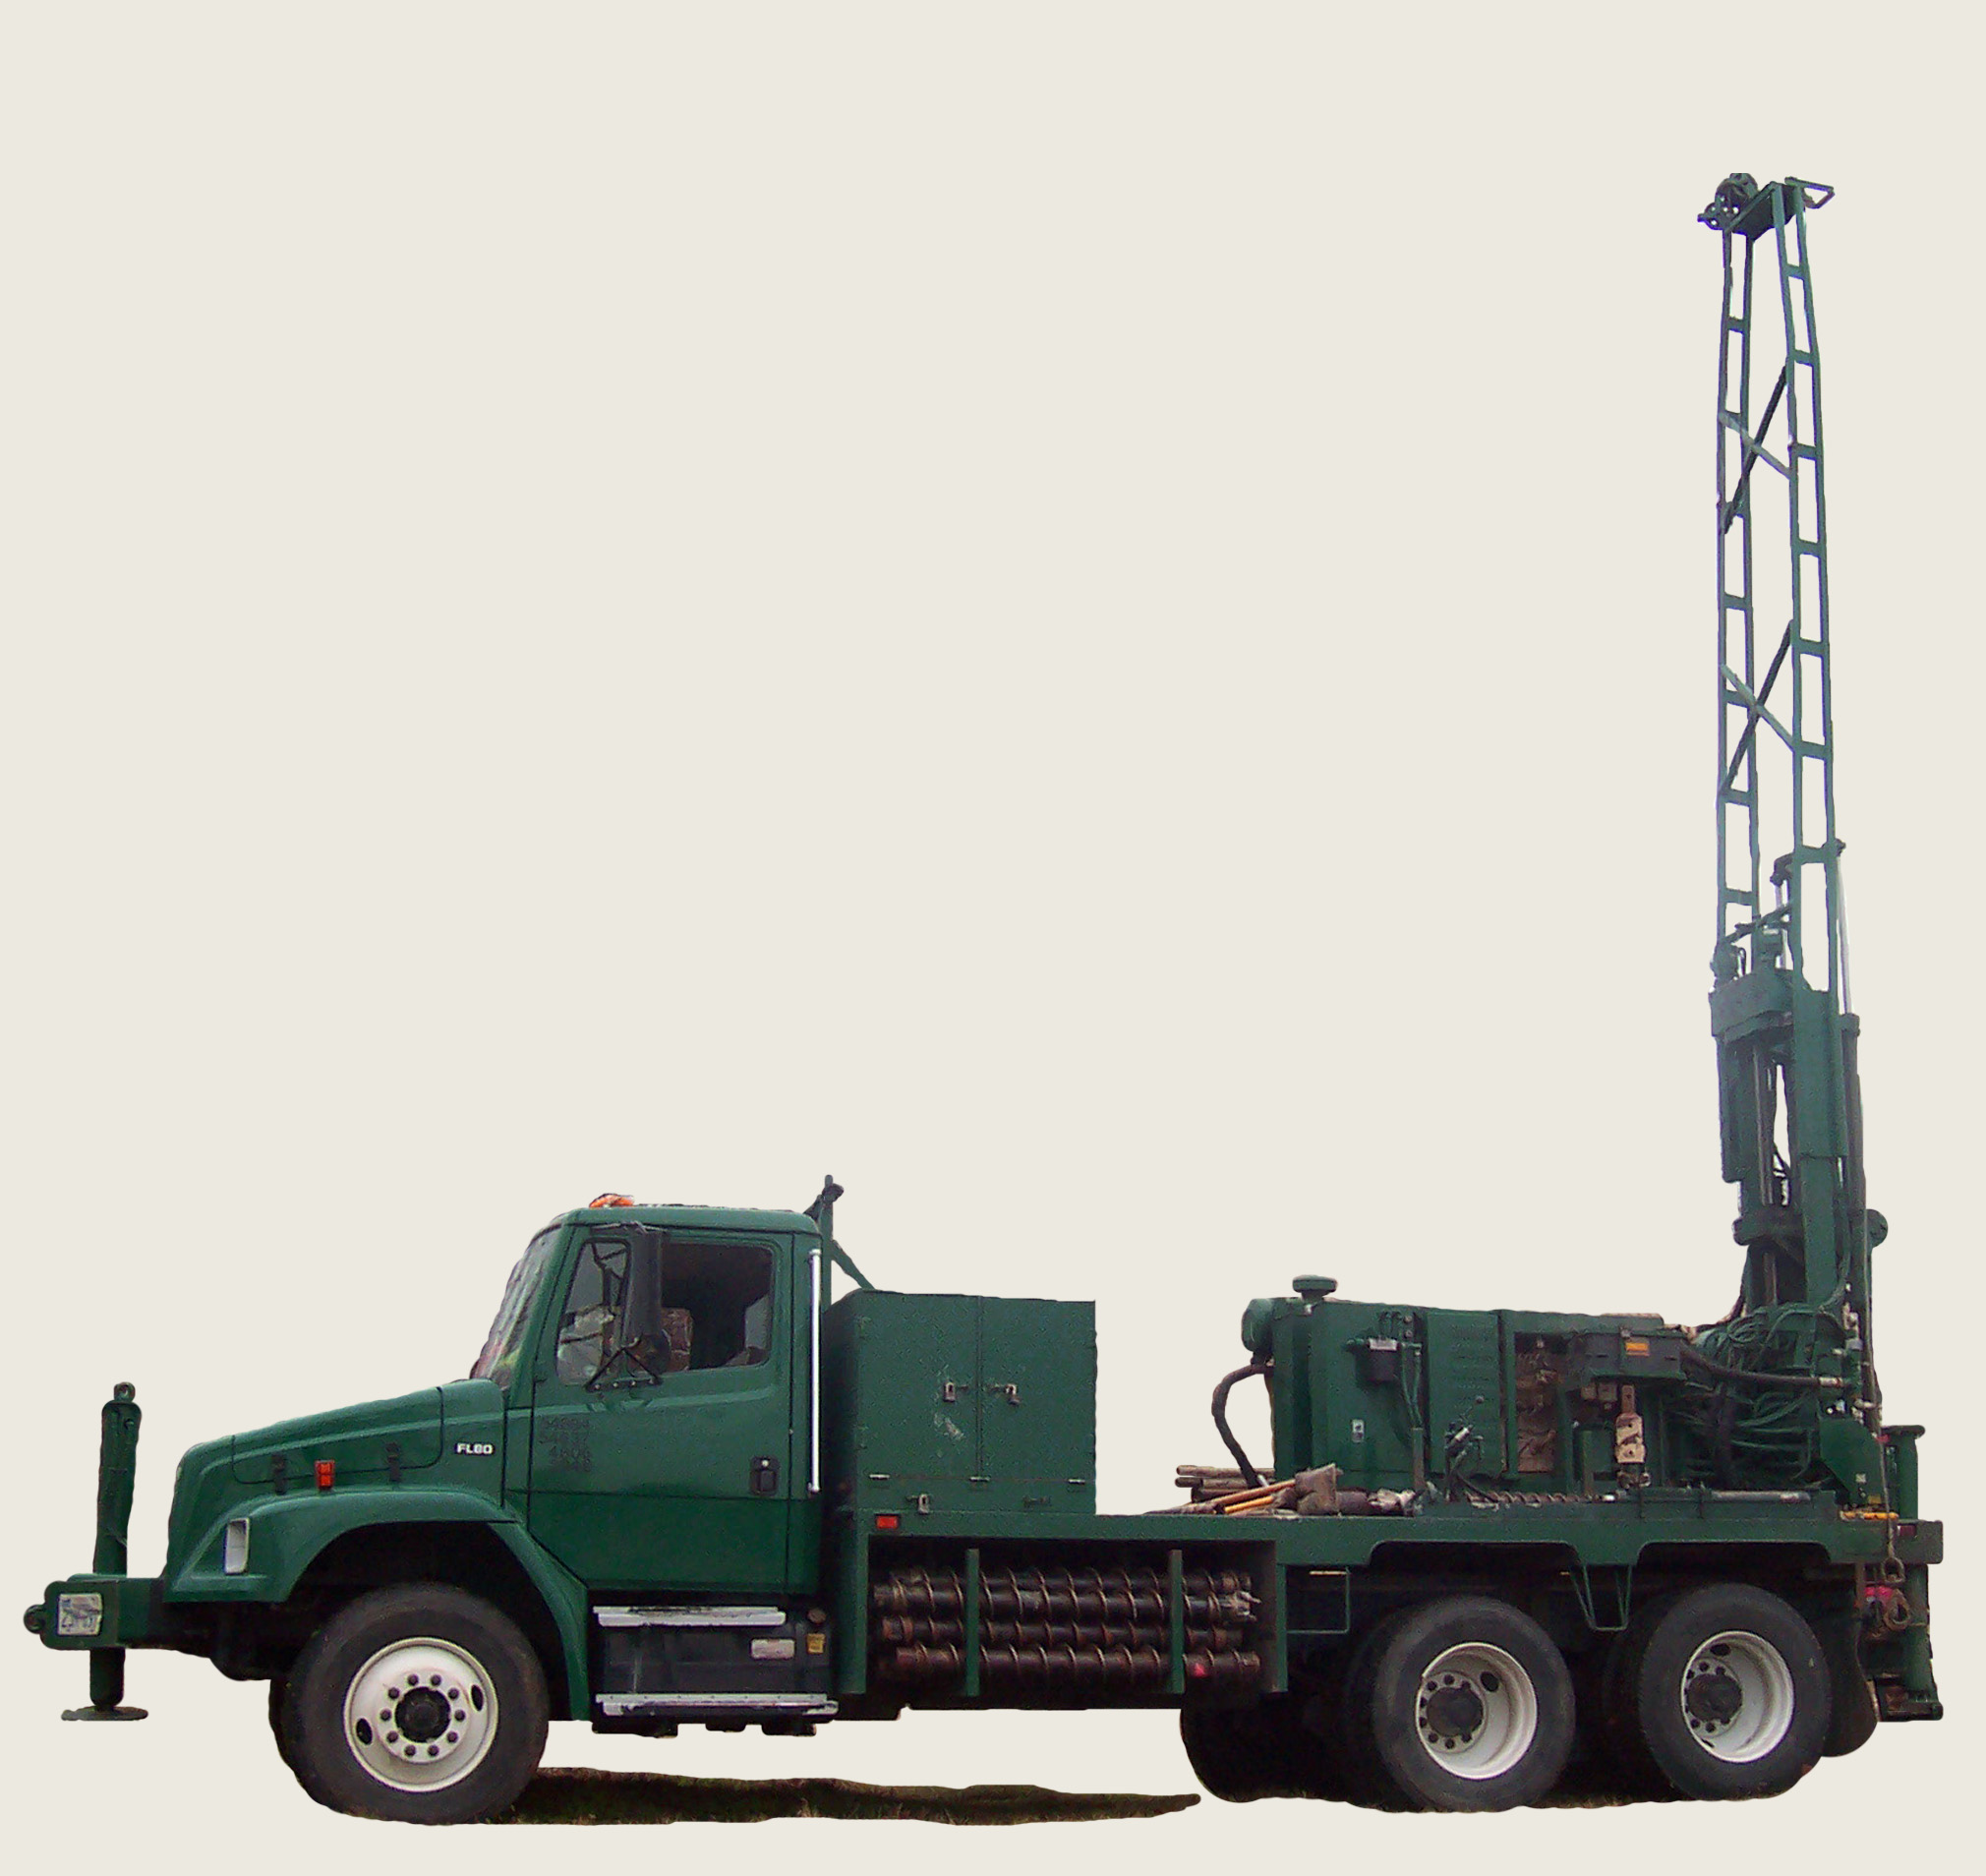 Mobile Drilling Rig Drilling Core Samples On A Gold Mining